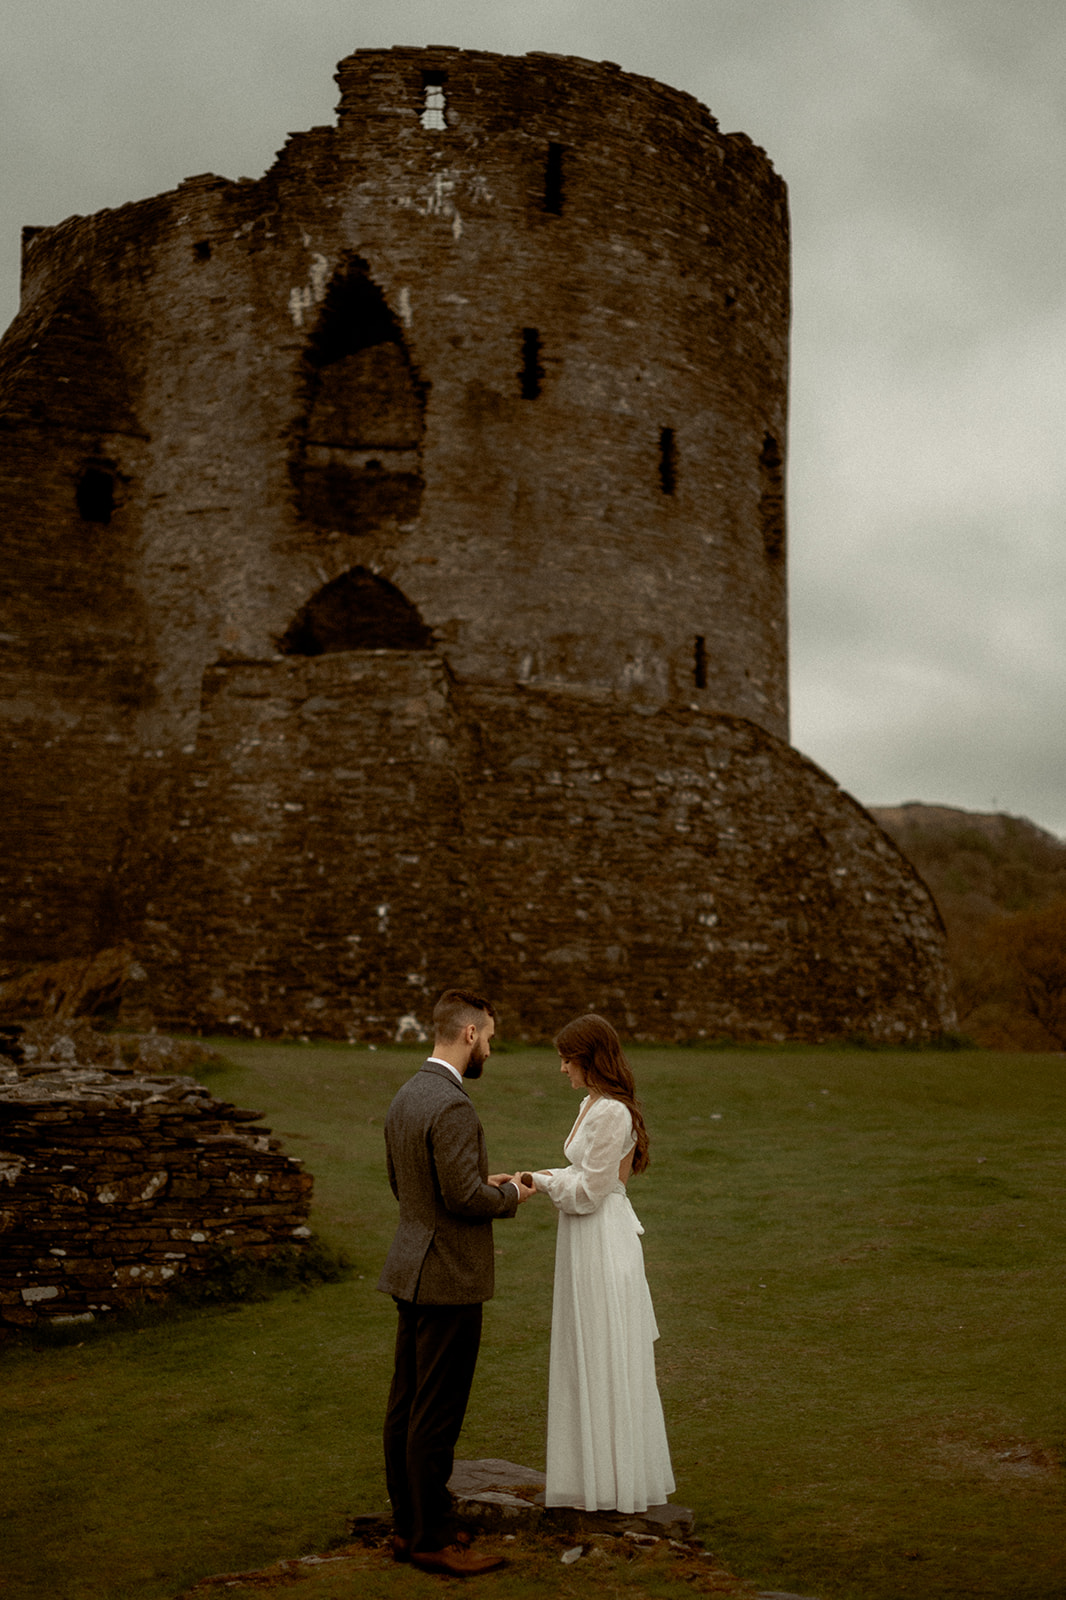 a couple from Canada in front of a castle in Wales on their elopement-style wedding day.